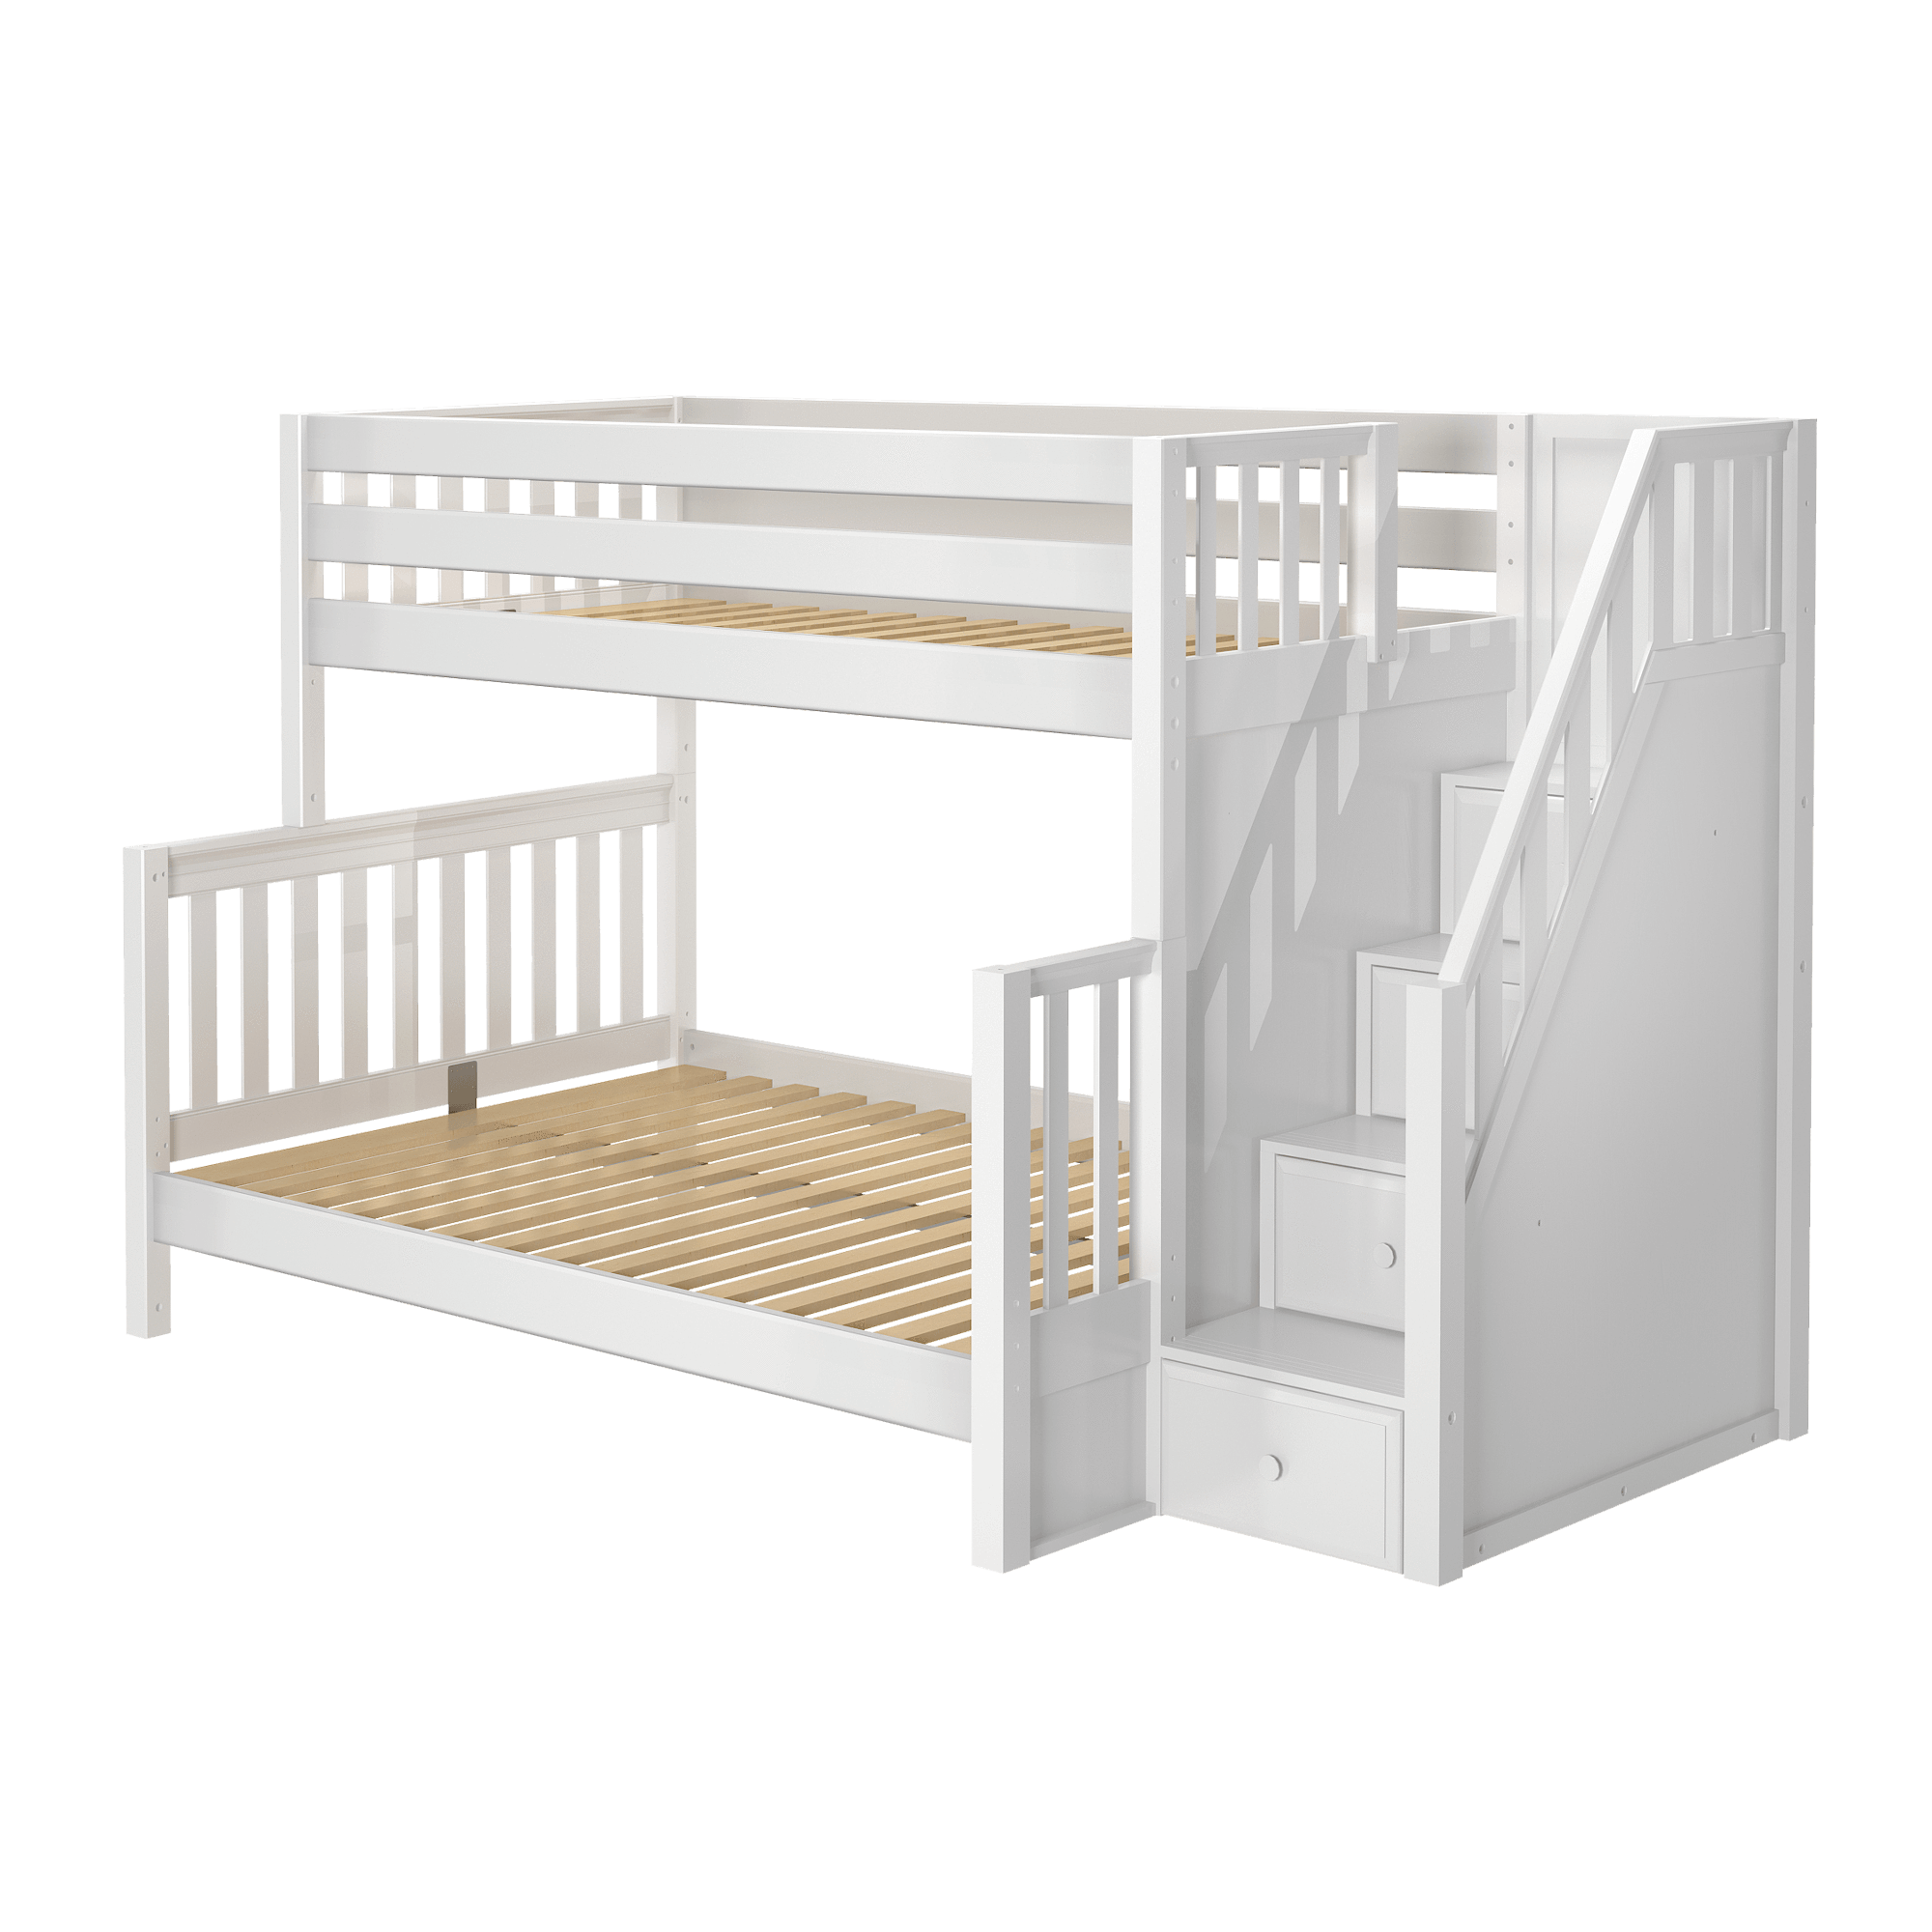 Maxtrix Medium Twin XL over Full XL Bunk Bed with Stairs